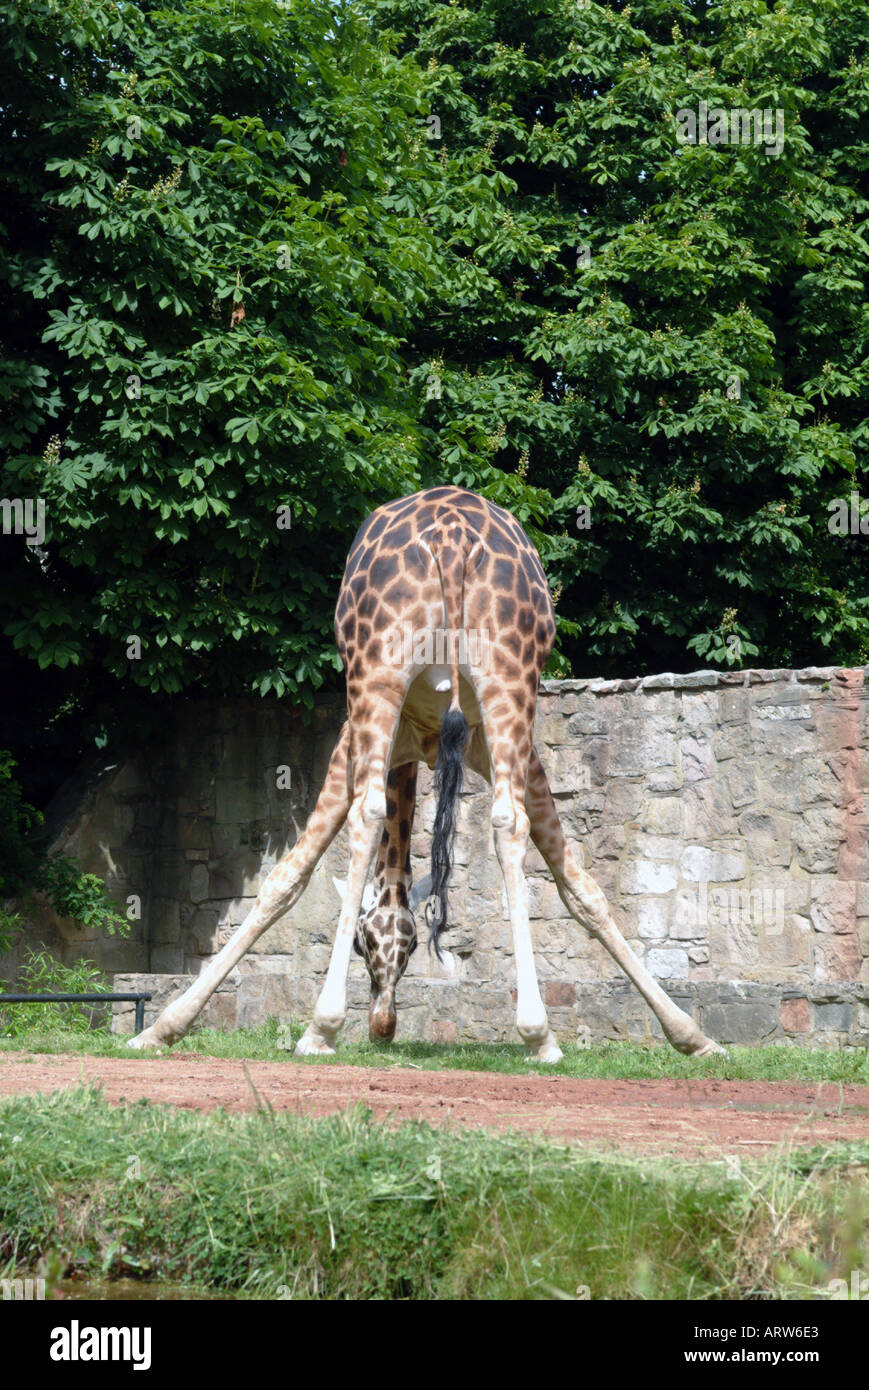 Rear view of giraffe in Edinburgh zoo with legs splayed so it can nibble the grass green leaves in background Stock Photo